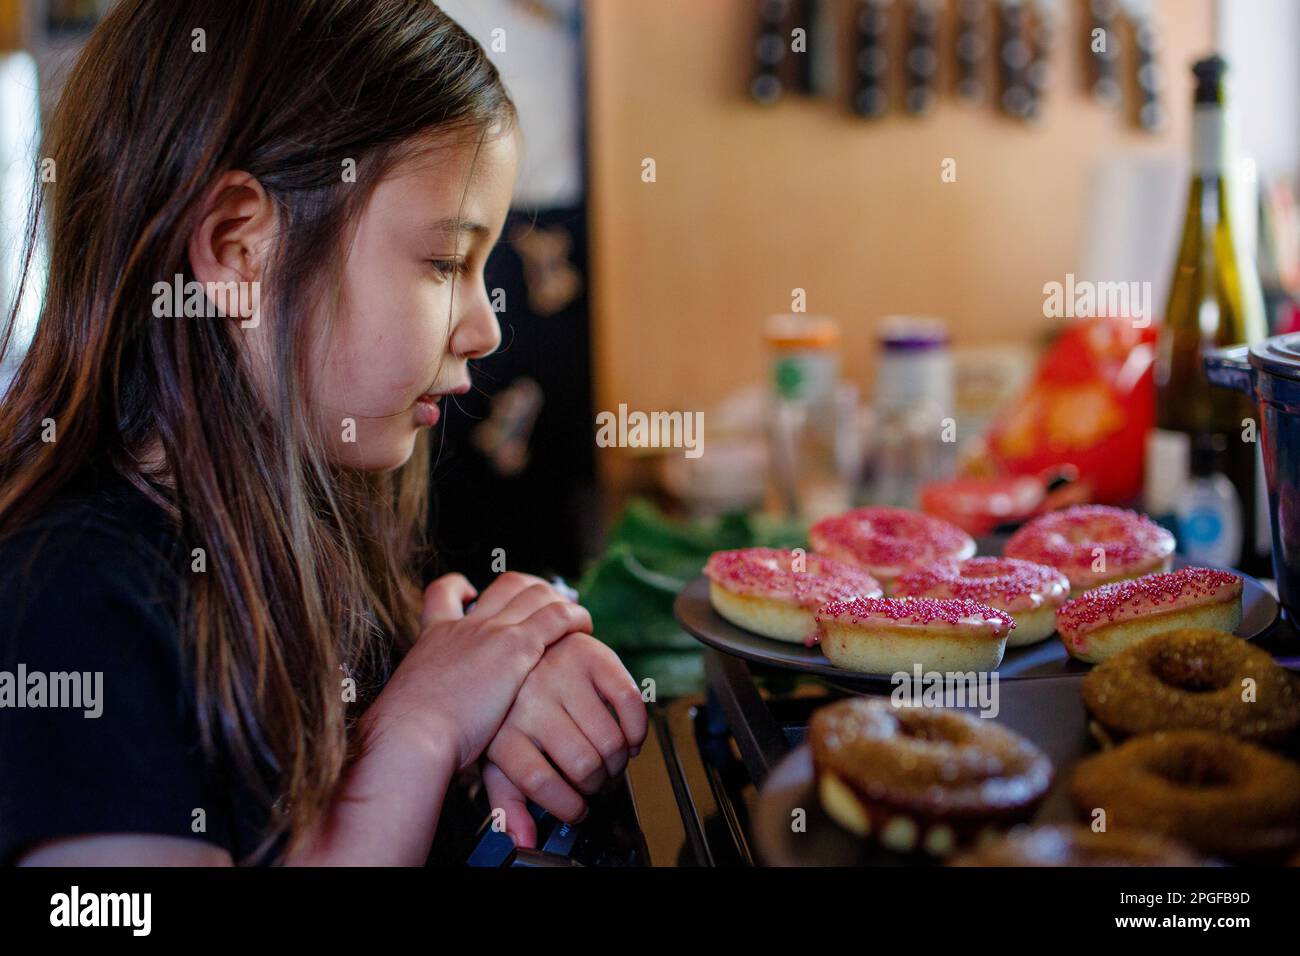 A little girl stares longingly at donuts on countertop Stock Photo